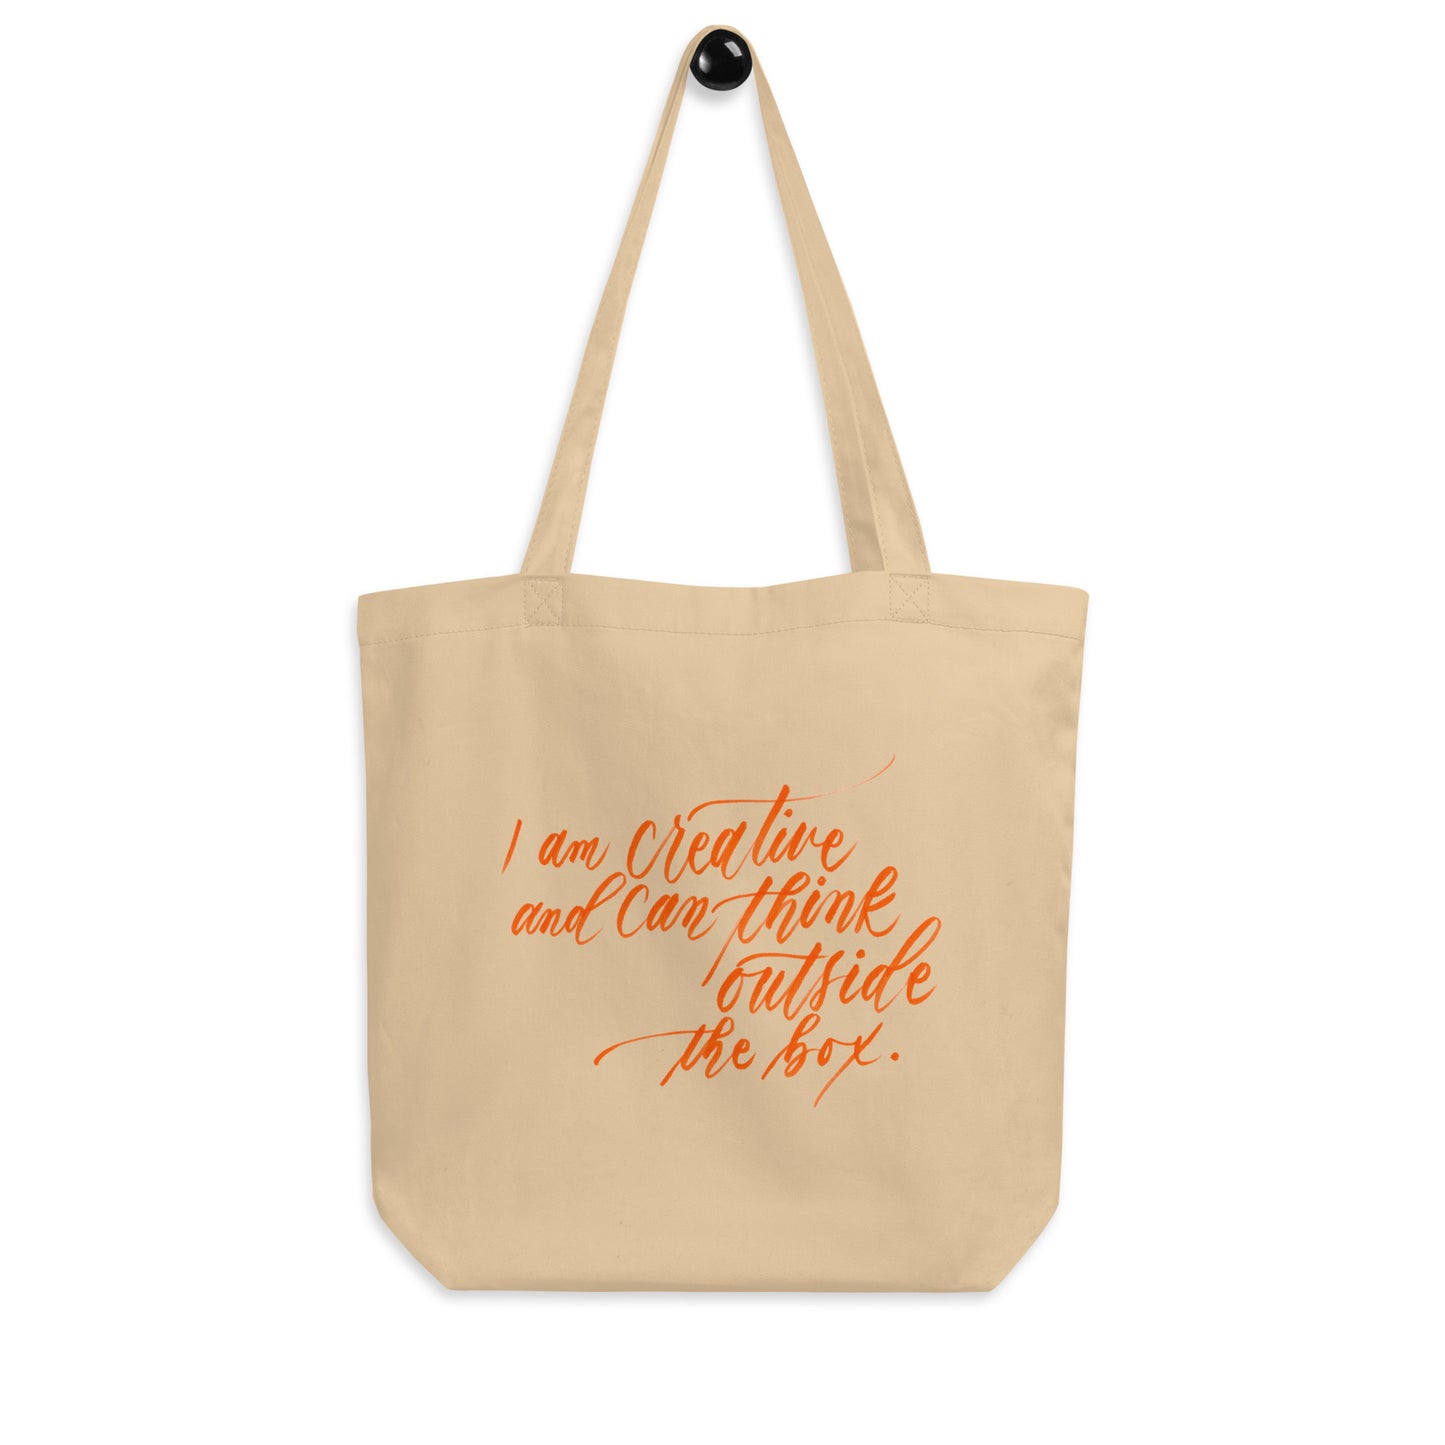 Art Tote - "I am creative..." Calligraphy Printed on Certified Organic Cotton Canvas MEDIUM Tote Bag - I am Empowered #03